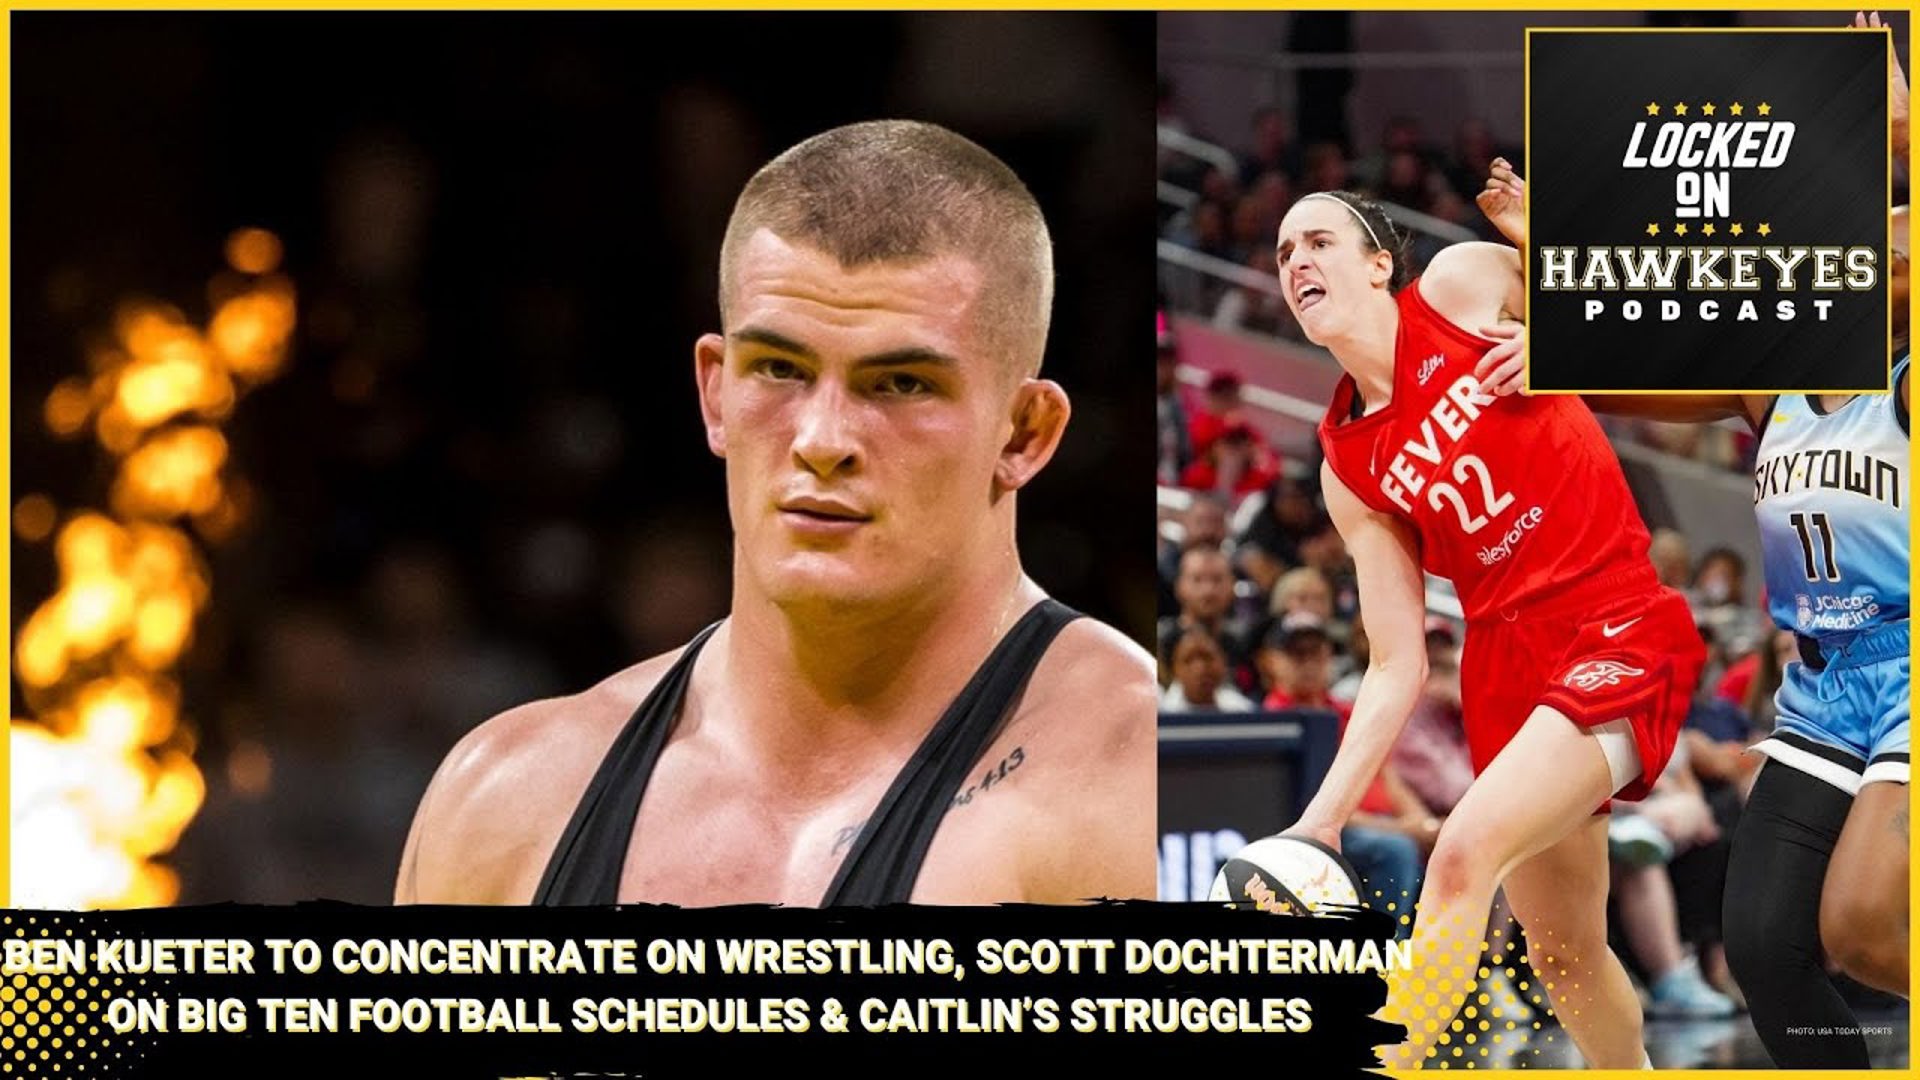 Ben Kueter to concentrate on wrestling, Scott Dochterman on football schedules & Caitlin's struggles